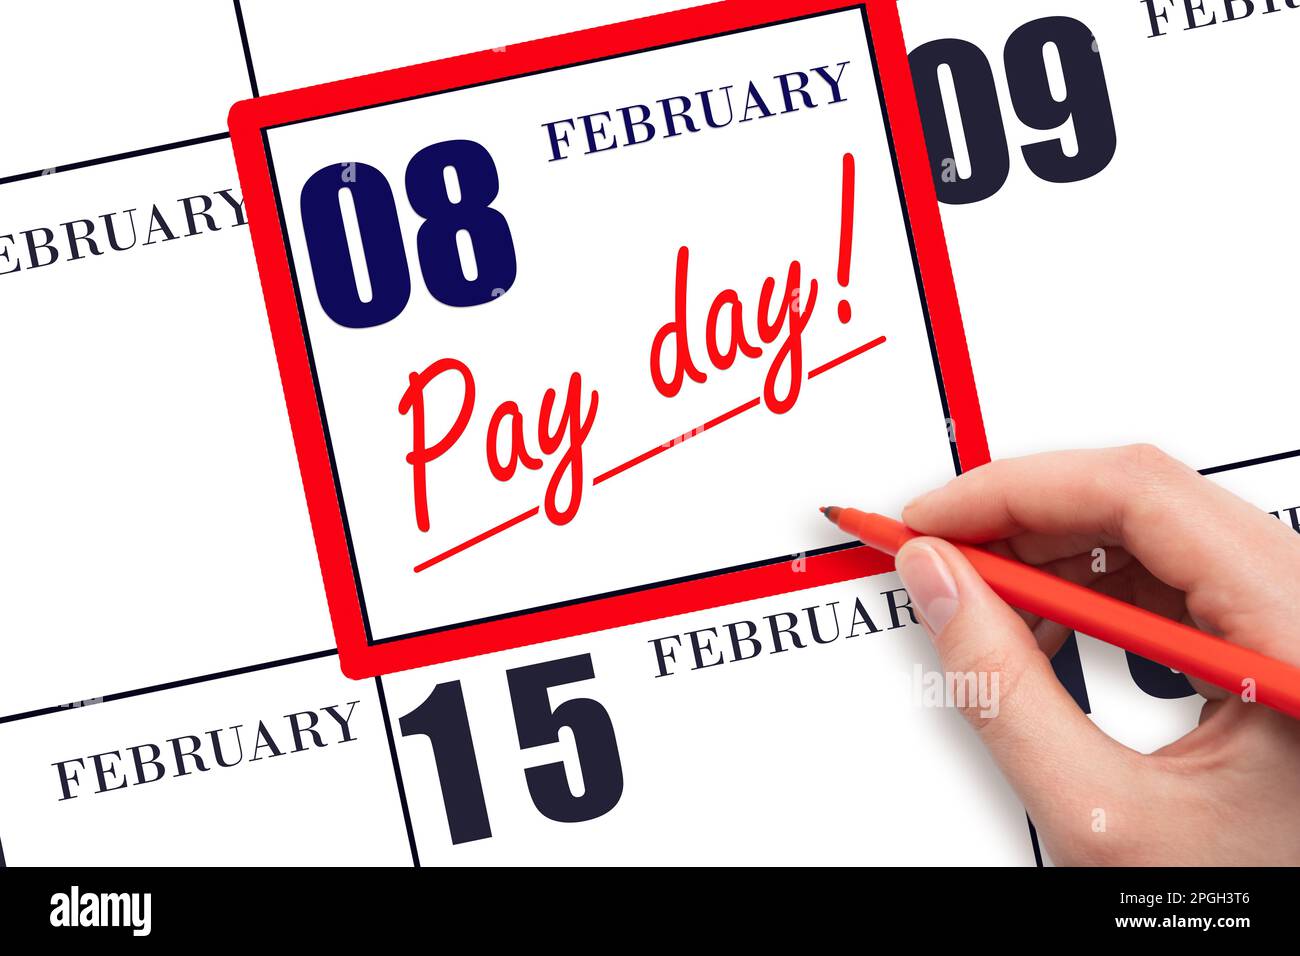 8th day of February. Hand writing text PAY DATE on calendar date February 8 and underline it. Payment due date. Reminder concept of payment. Winter mo Stock Photo